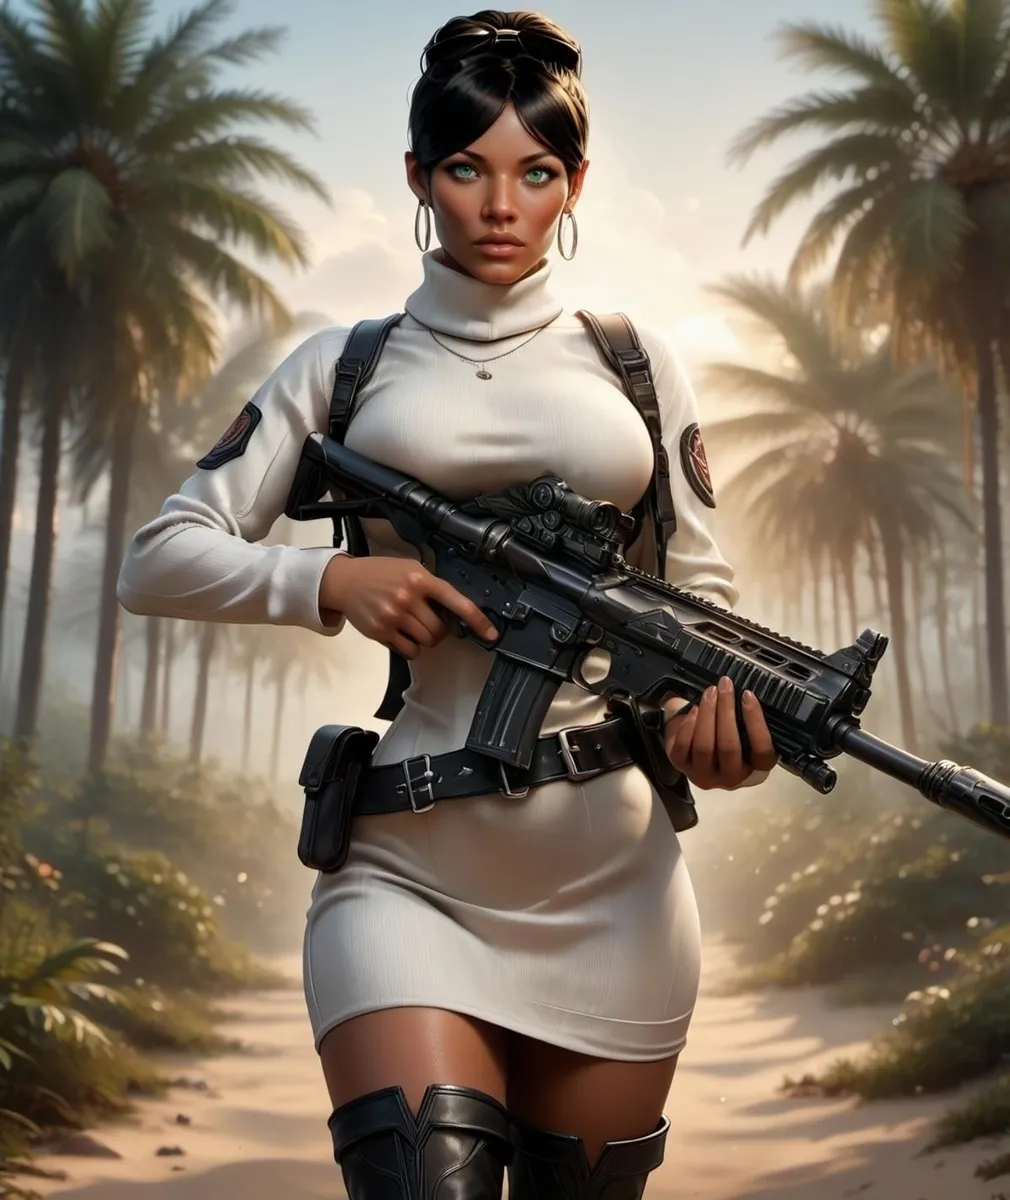 A tactical woman wearing a white outfit, holding a rifle in a jungle background. AI generated image using Stable Diffusion.